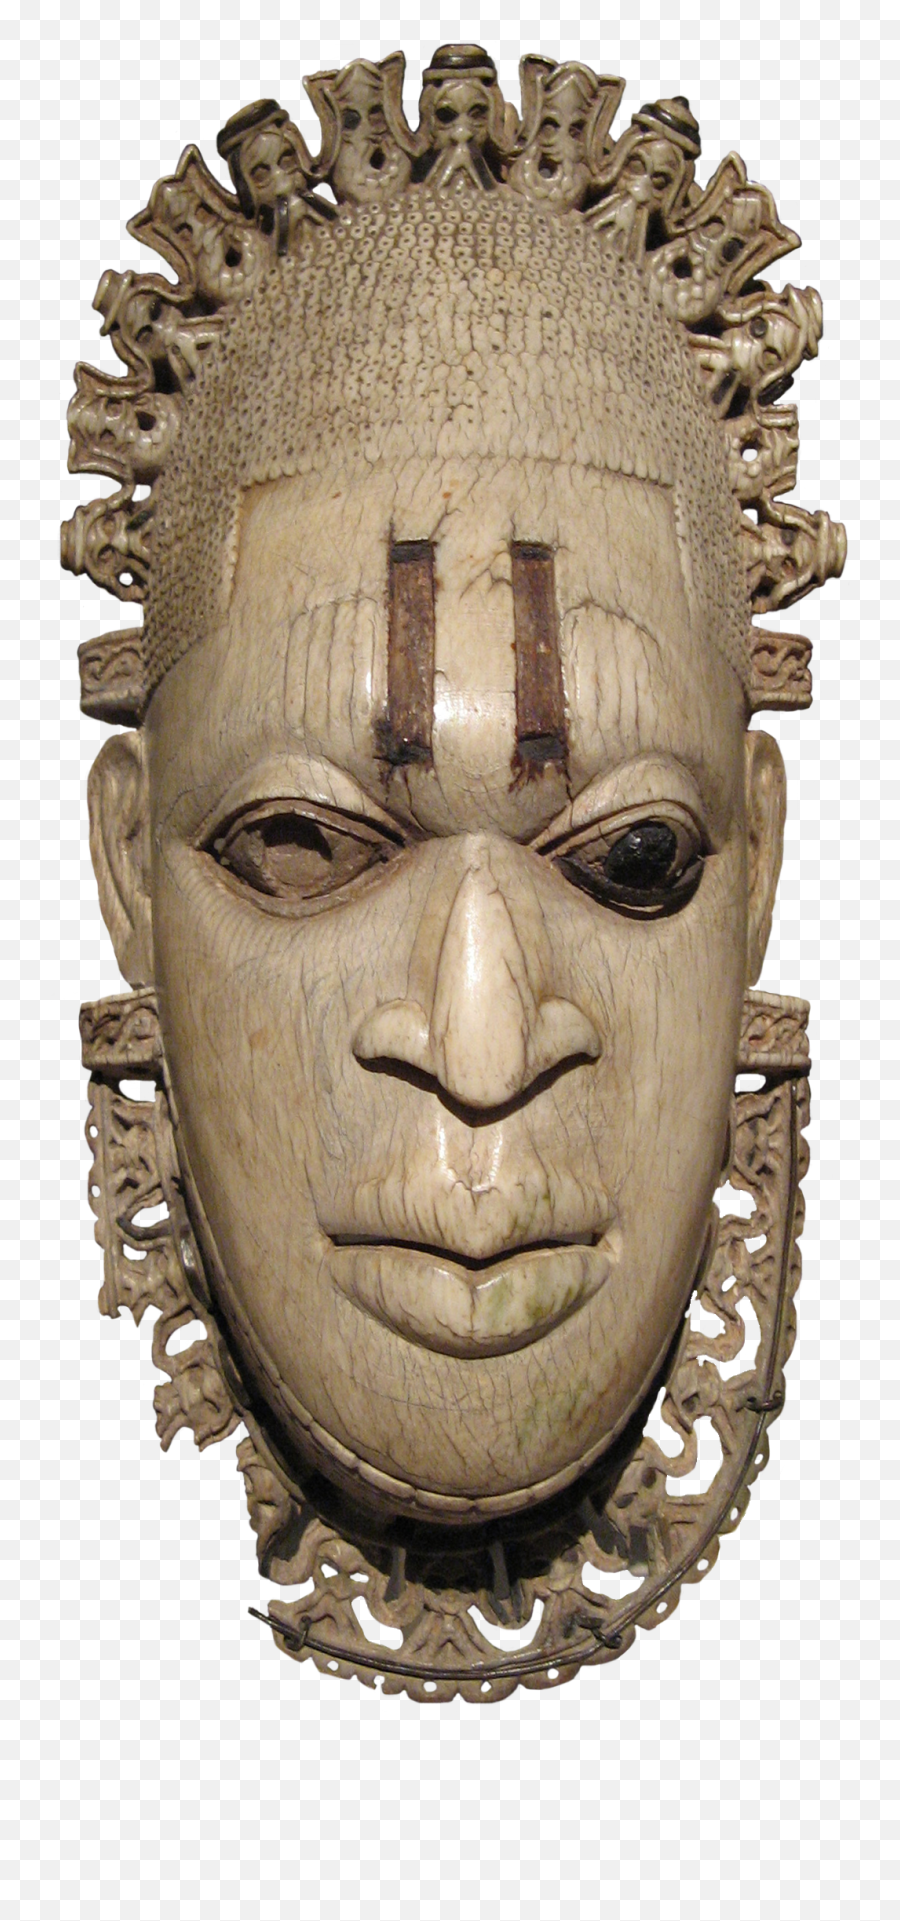 Fileedo Ivory Mask 18472png - Wikipedia Mask Of Queen Idia,Masks Png